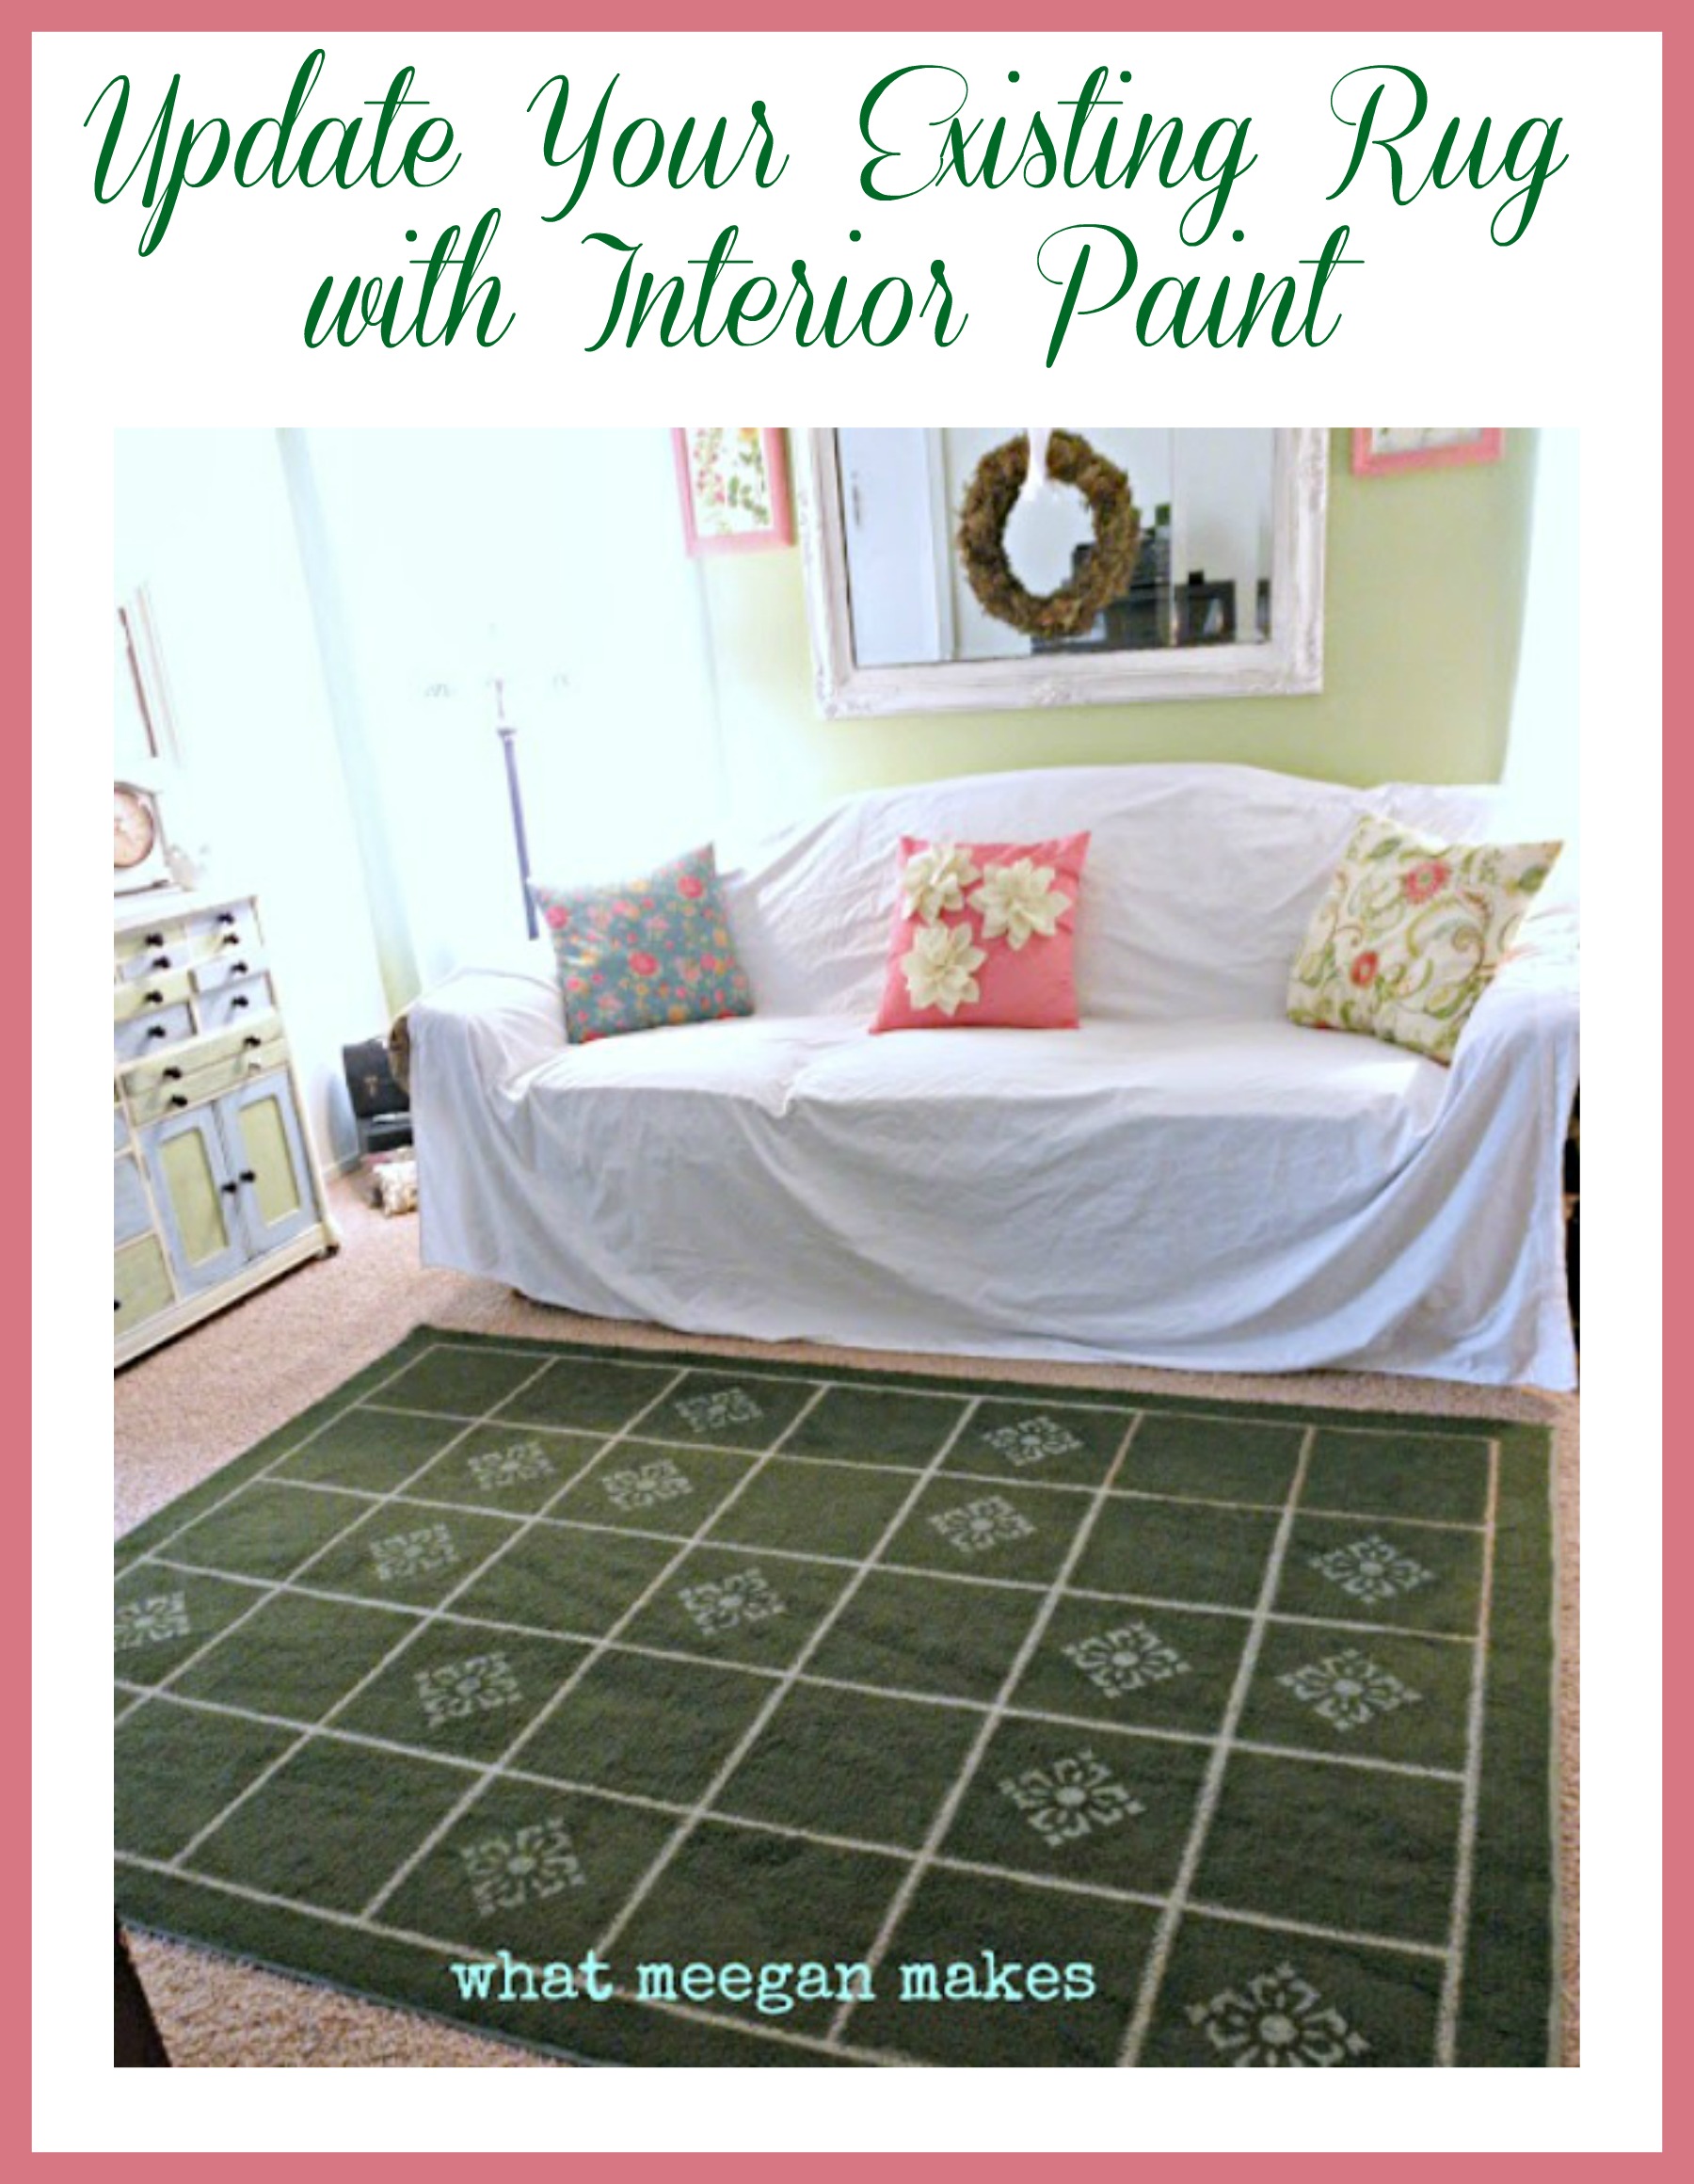 Update Your Existing Rug with Interior Paint